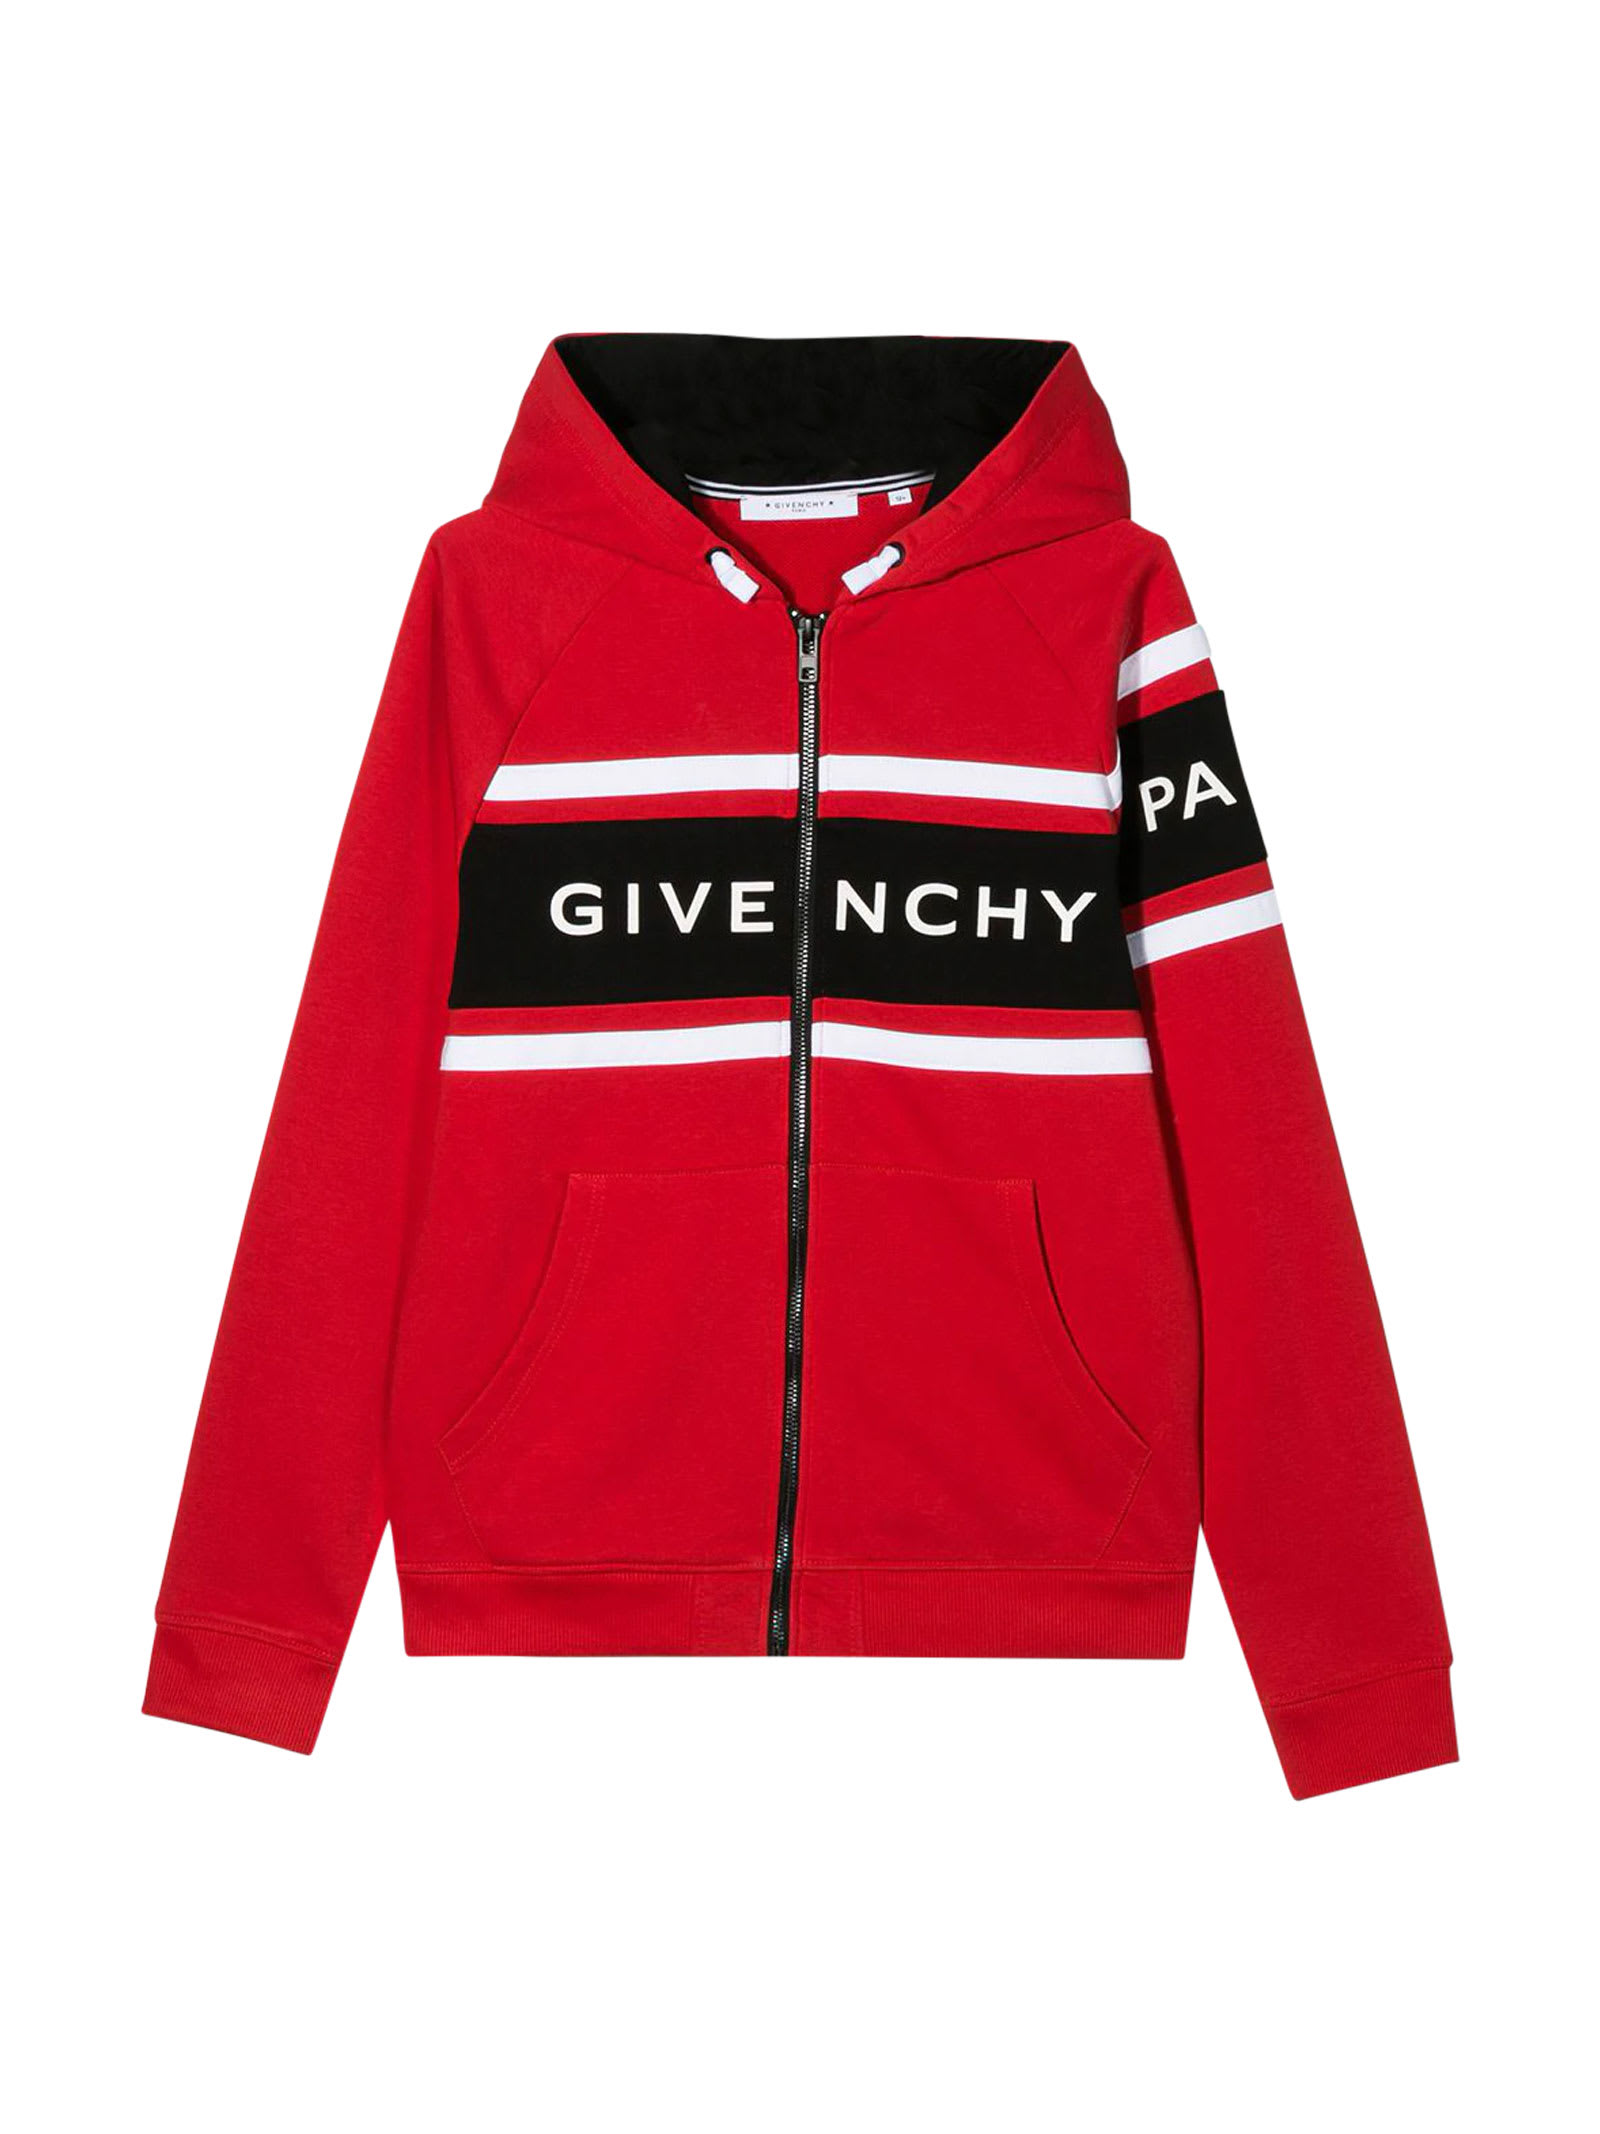 GIVENCHY GIVENCHY RED SWEATSHIRT,H25158991